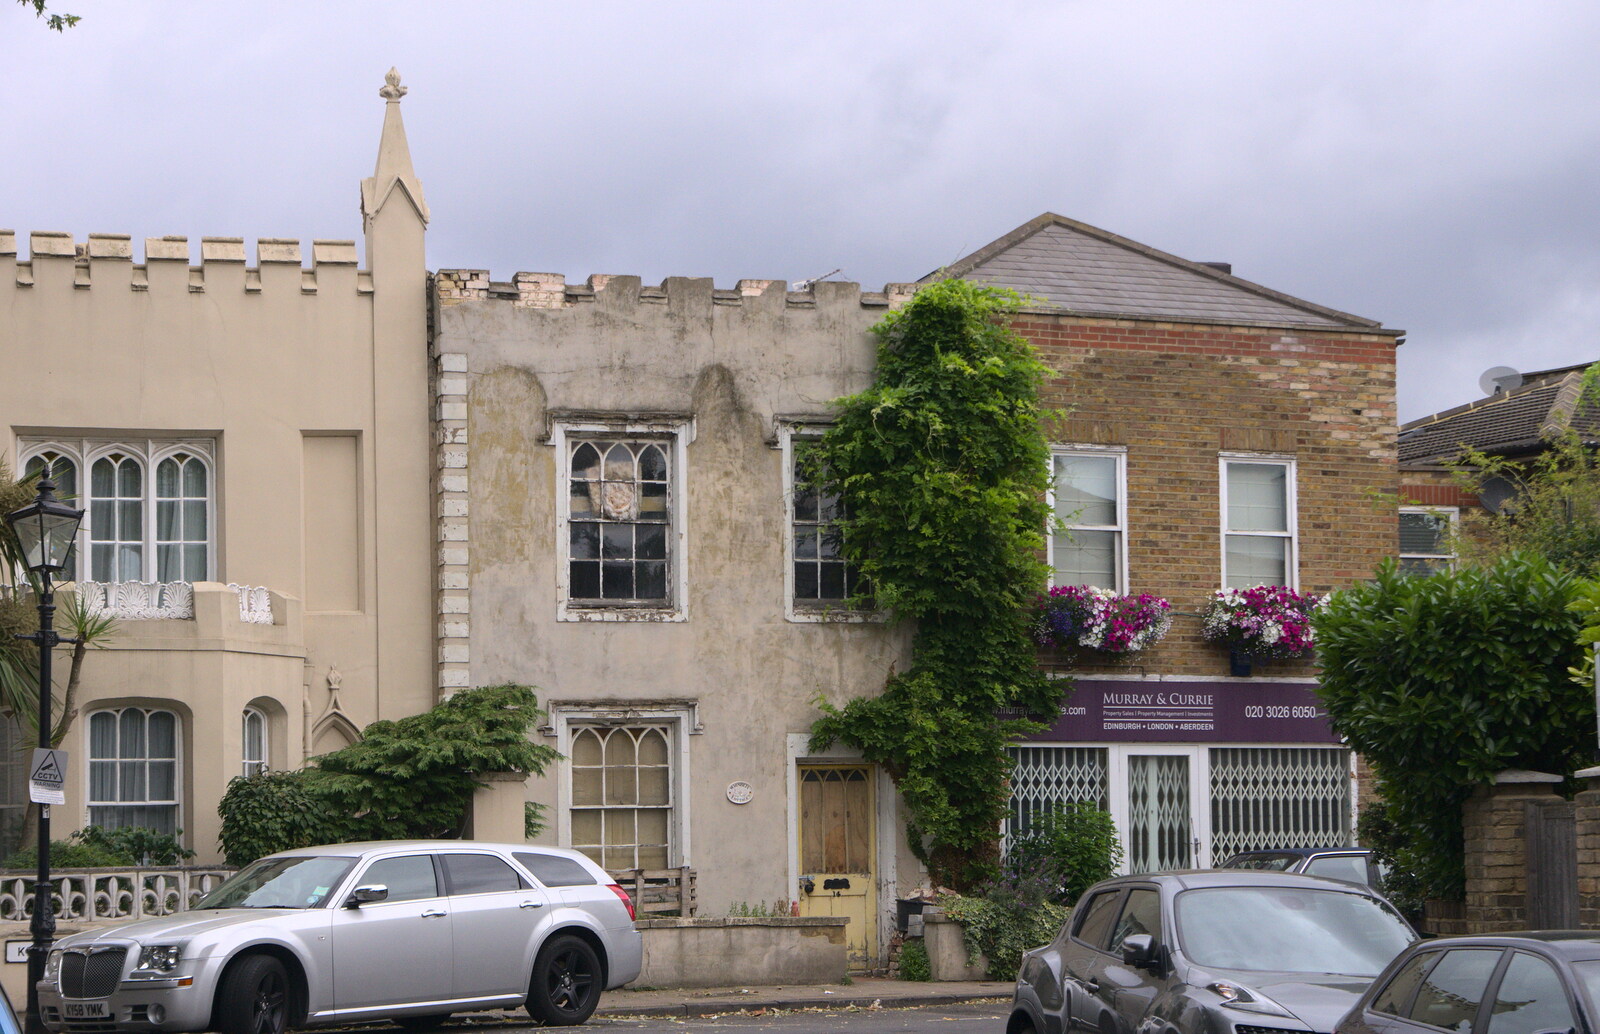 A derelict building on Kew Foot Lane from It's a SwiftKey Knockout, Richmond Rugby Club, Richmond, Surrey - 7th July 2015